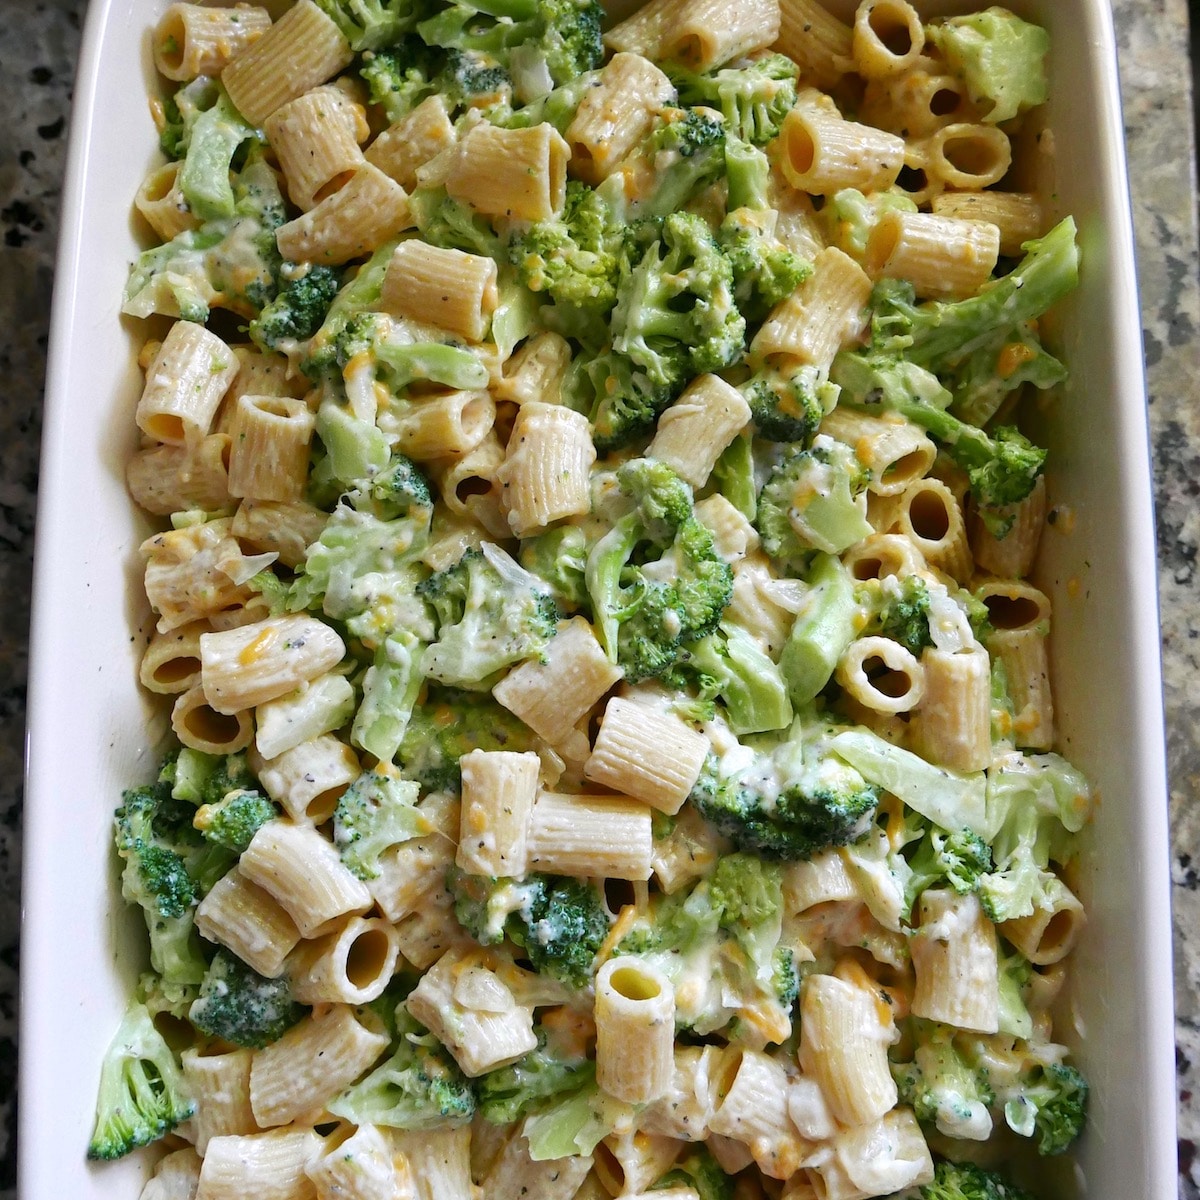 Cheese sauce mixed into pasta and broccoli in a baking dish.